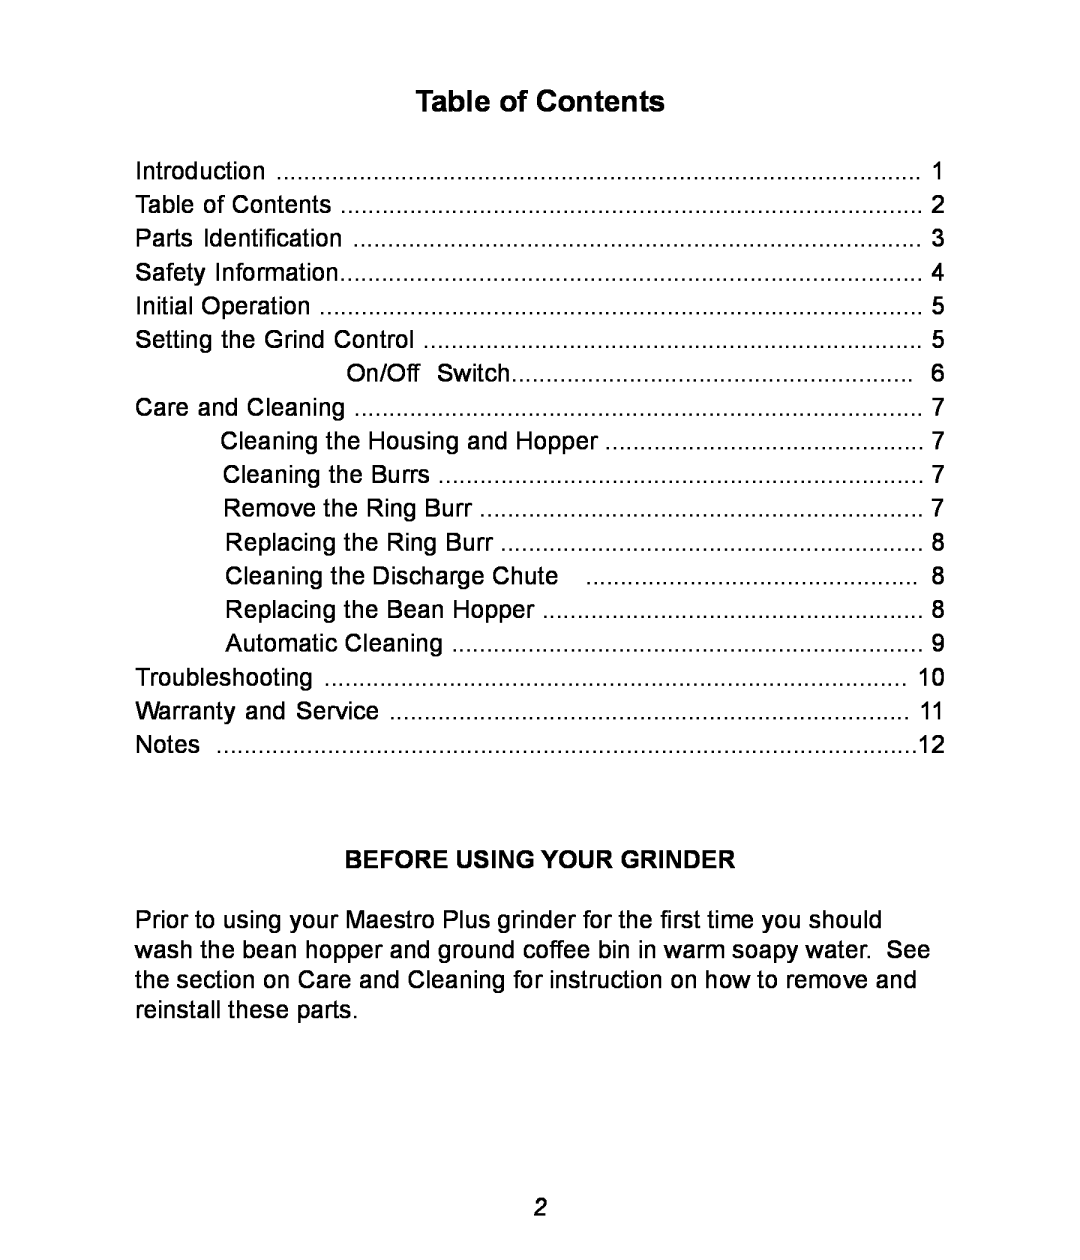 Baratza Maestro manual Table of Contents, Before Using Your Grinder 